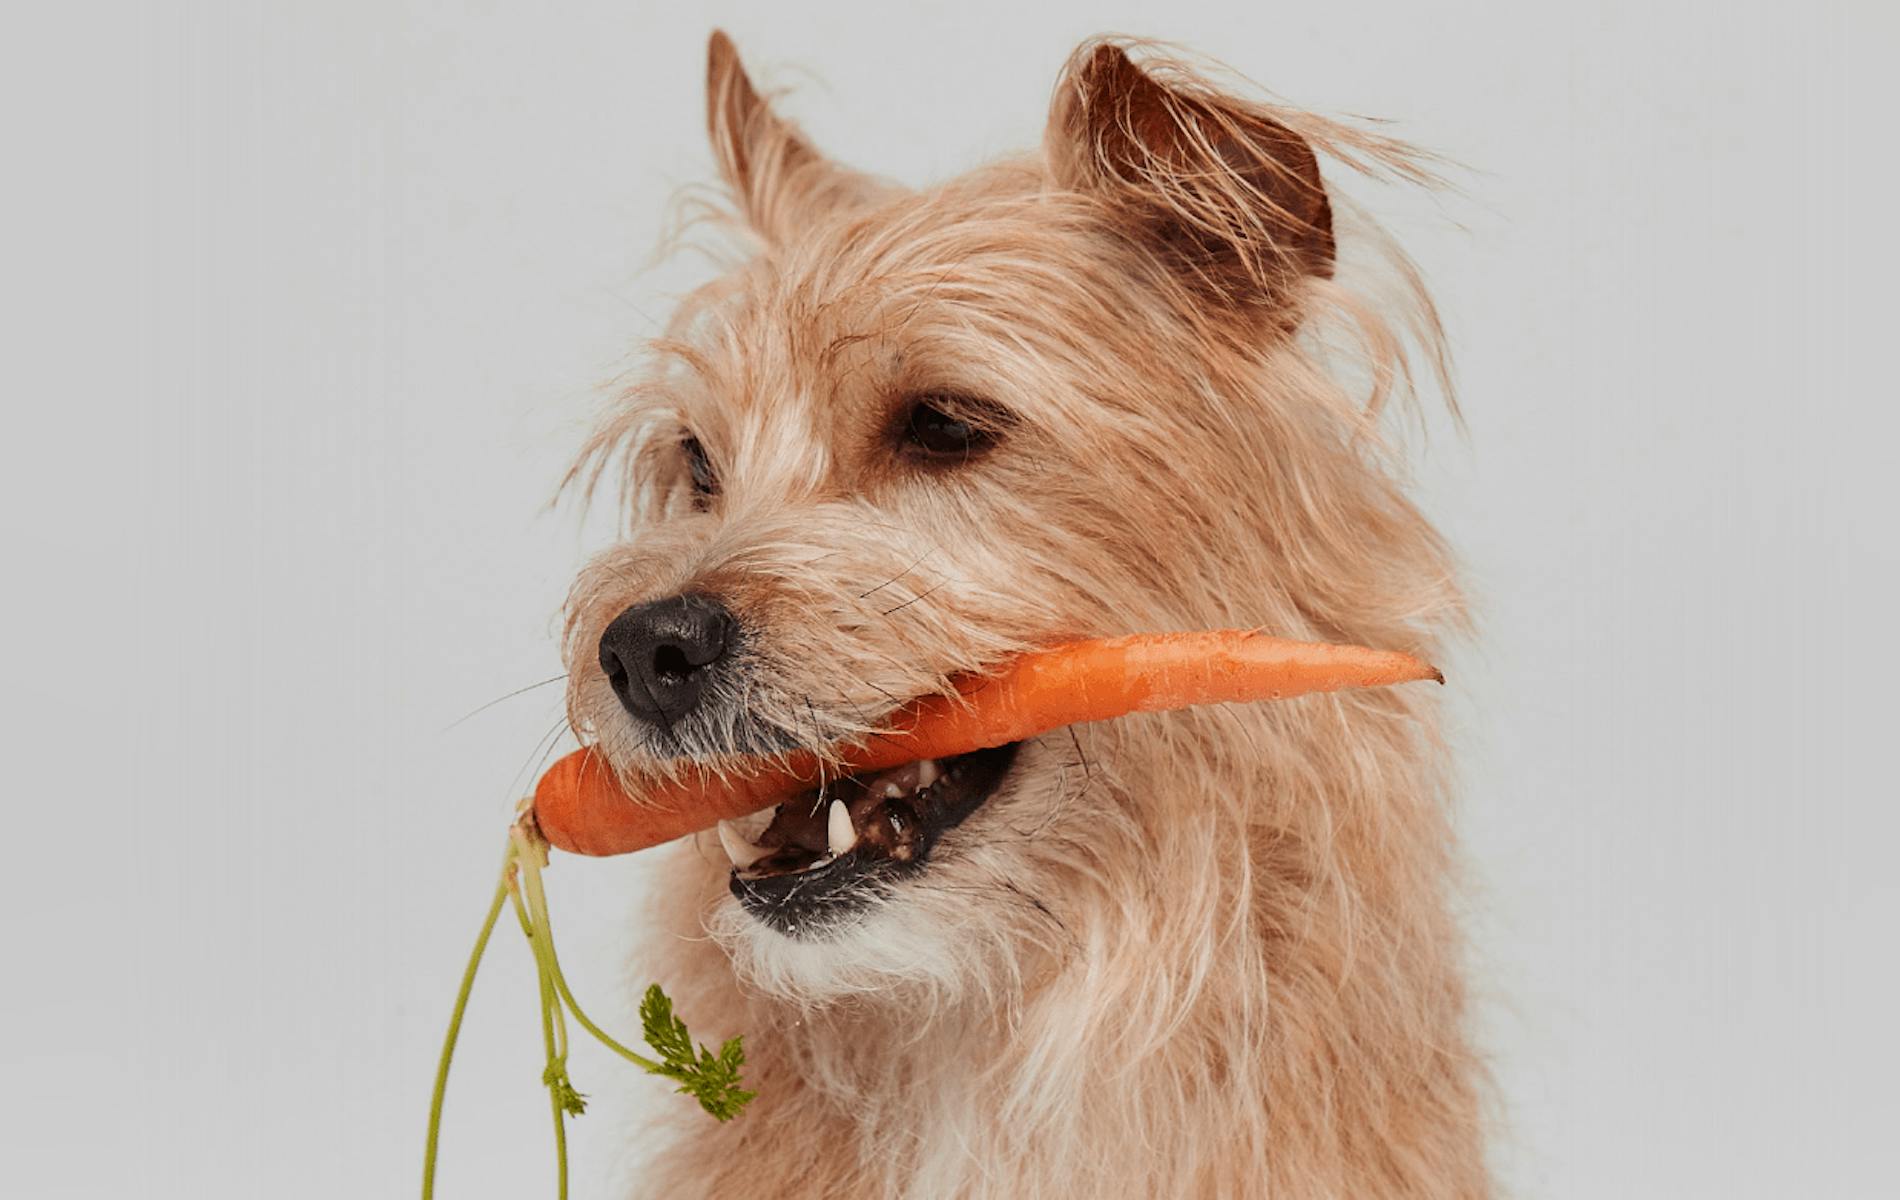 Dog with carrot in its mouth